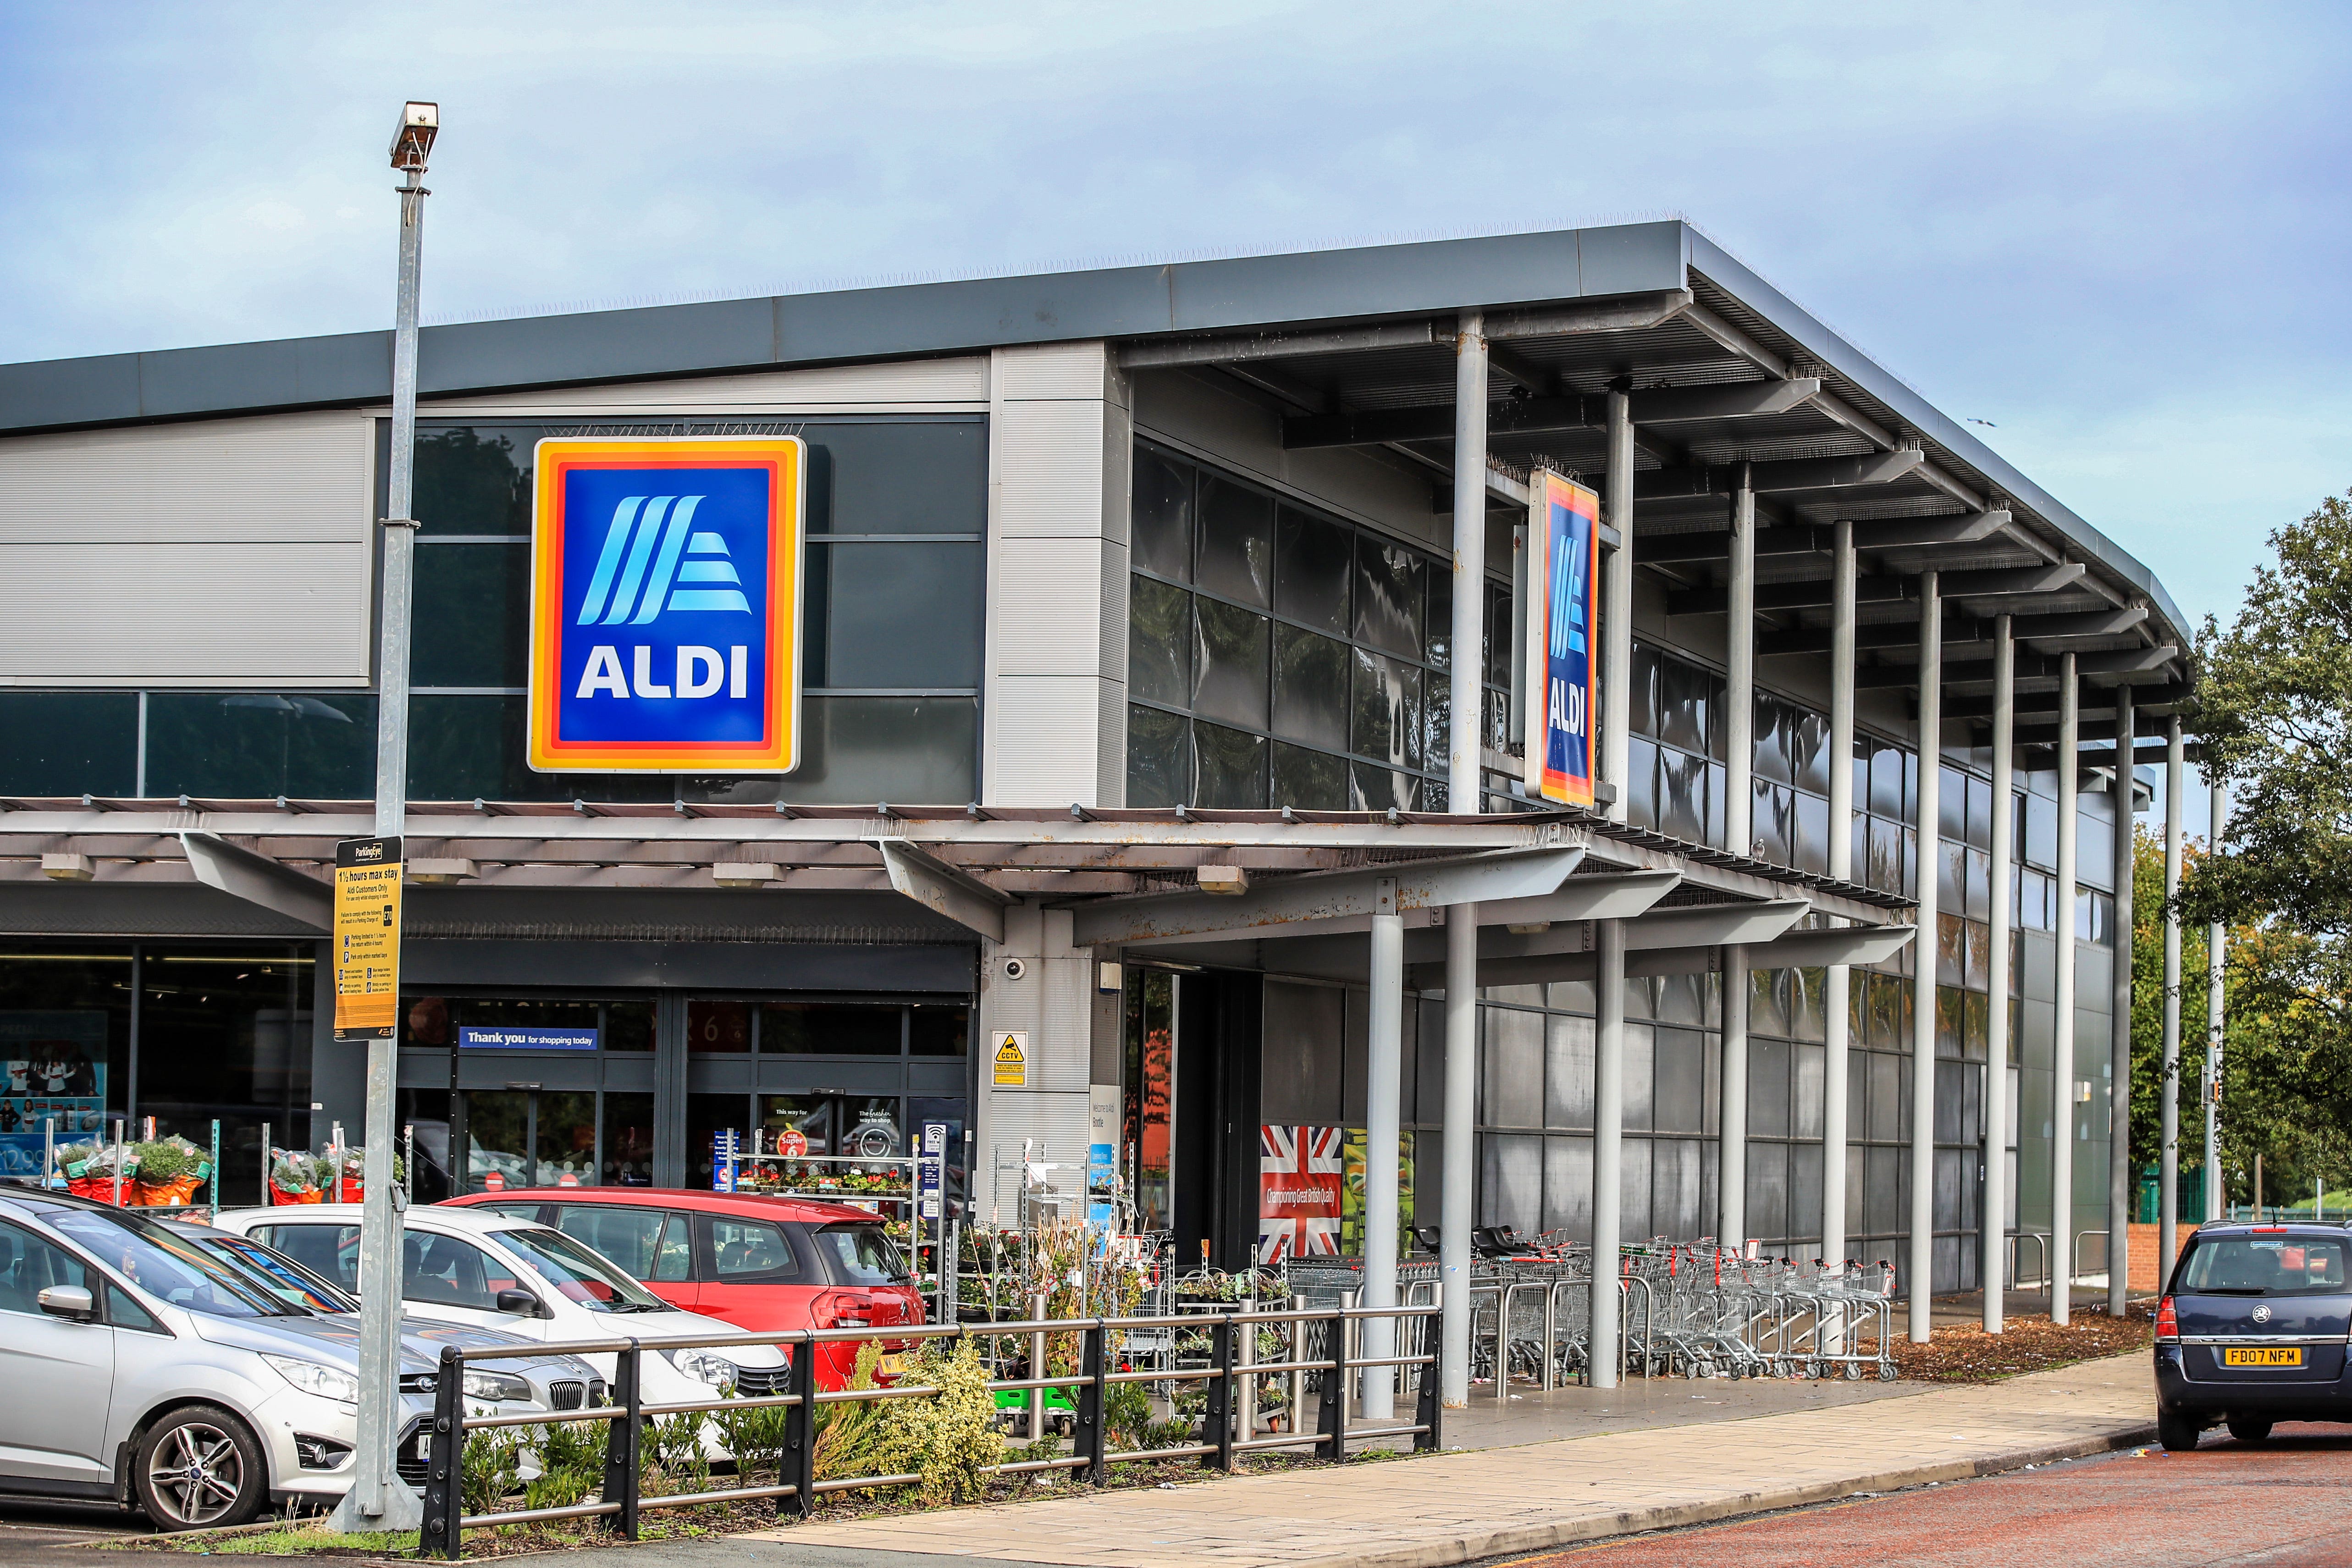 The own-label products Aldi specialises in have grown more popular in recent times